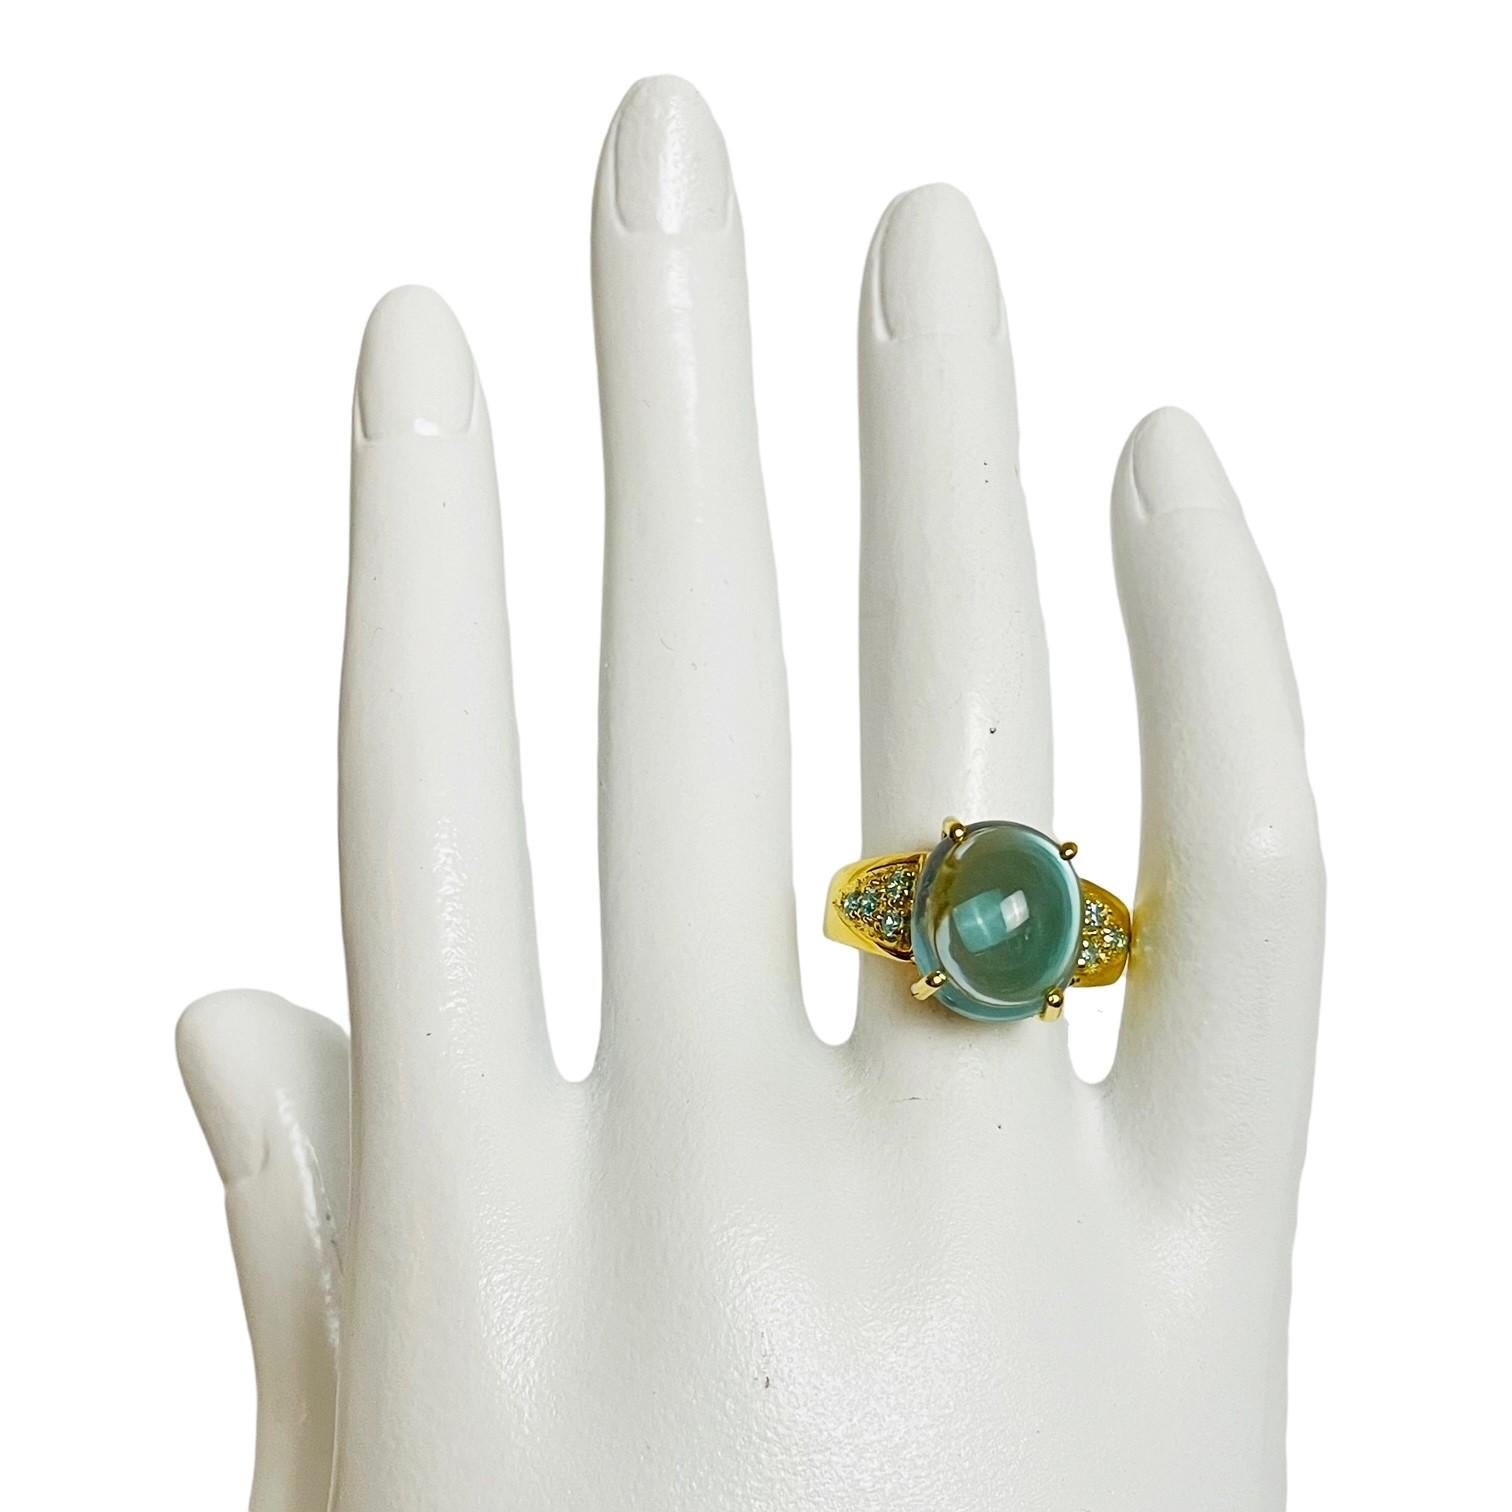 New Aquamarine 7.80 Ct Cabachon 14k Yellow Gold Plated Sterling Ring 3